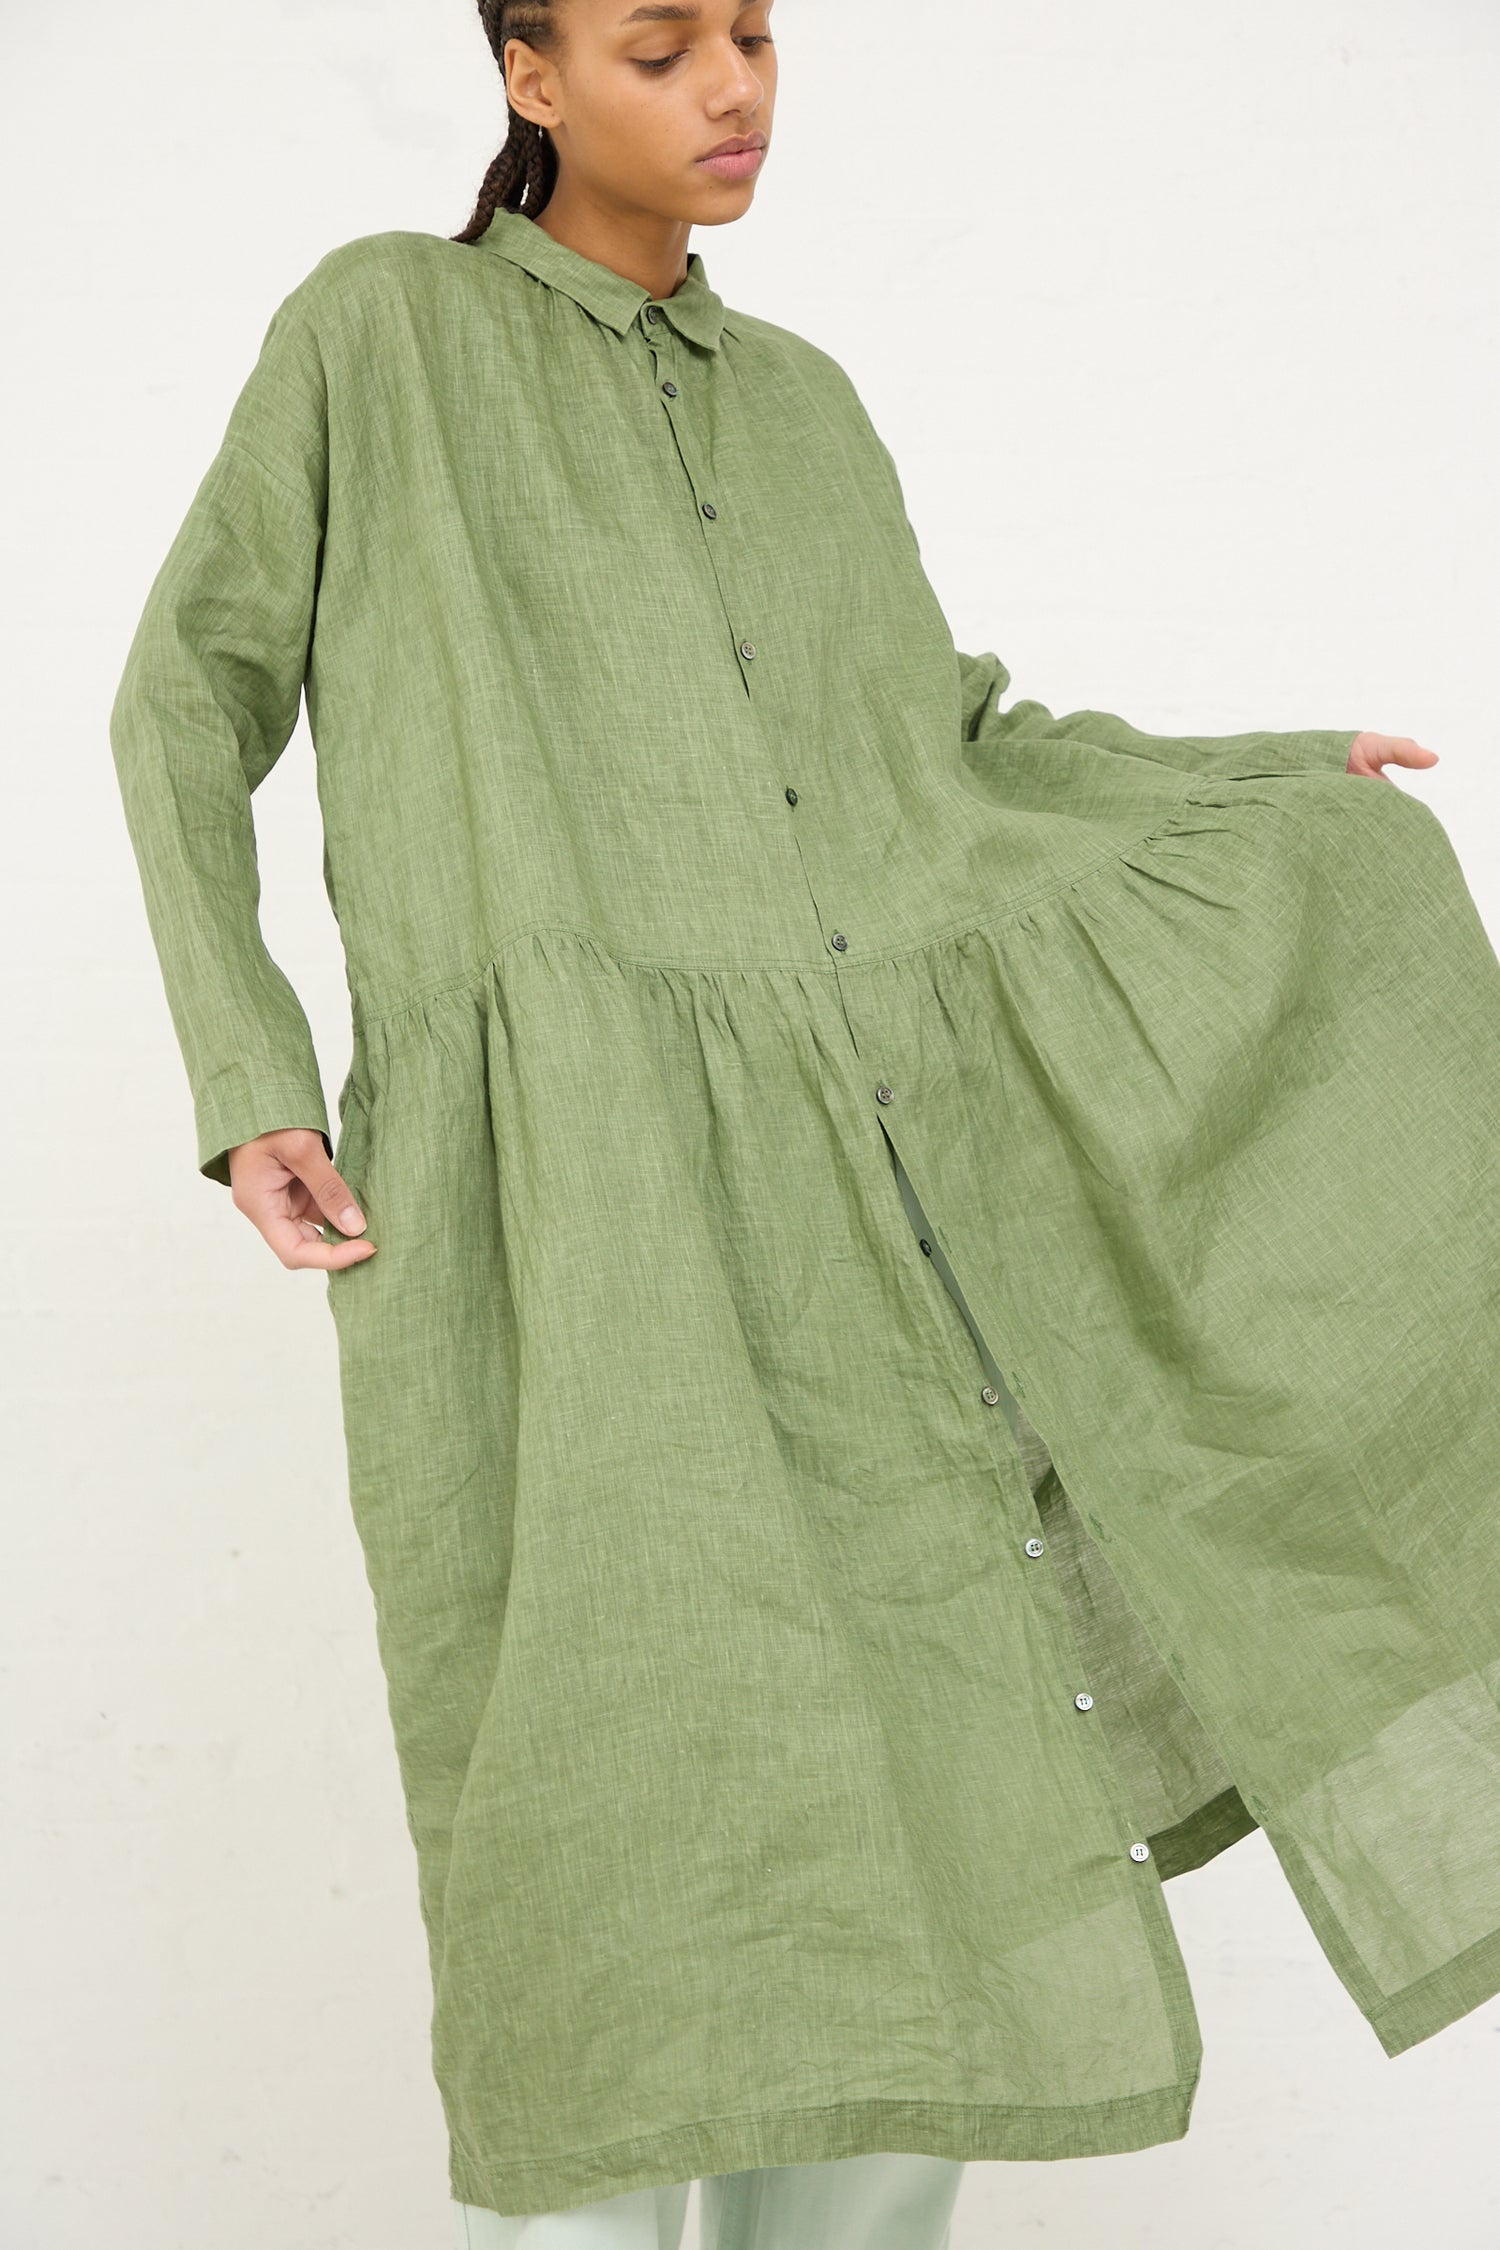 Woman in an oversized Ichi Antiquités Woven Linen Dress in Green with buttons standing against a white background.